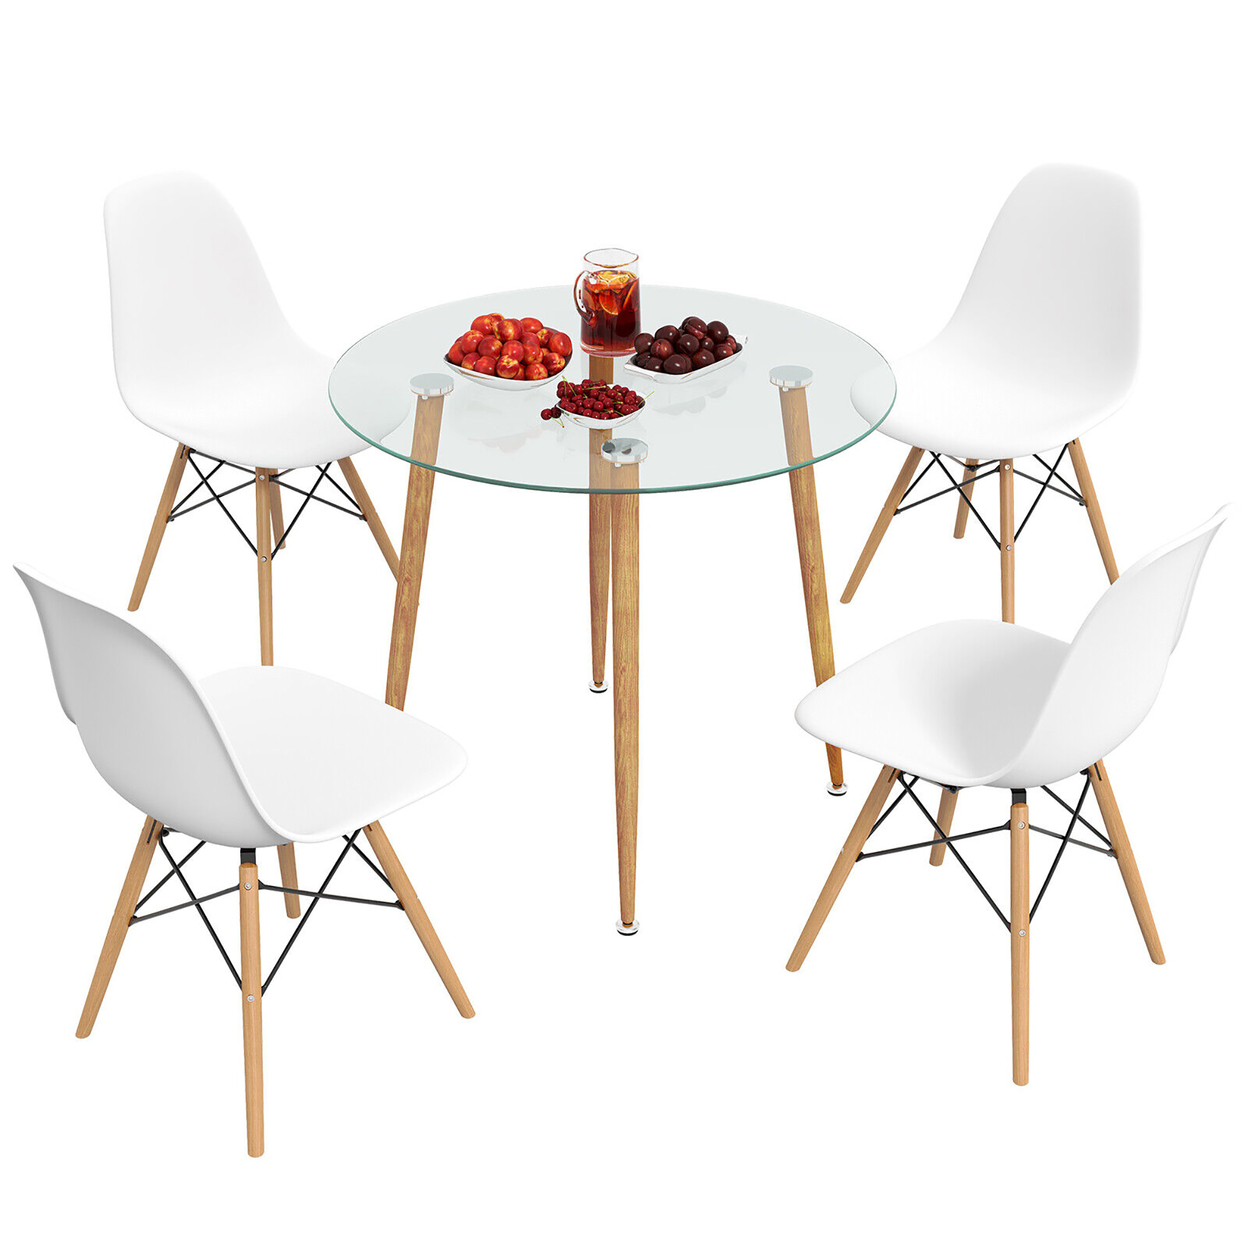 5 PCS Dining Table Set Tempered Glass Table 4 Chairs W/ Beech Wood Leg Kitchen